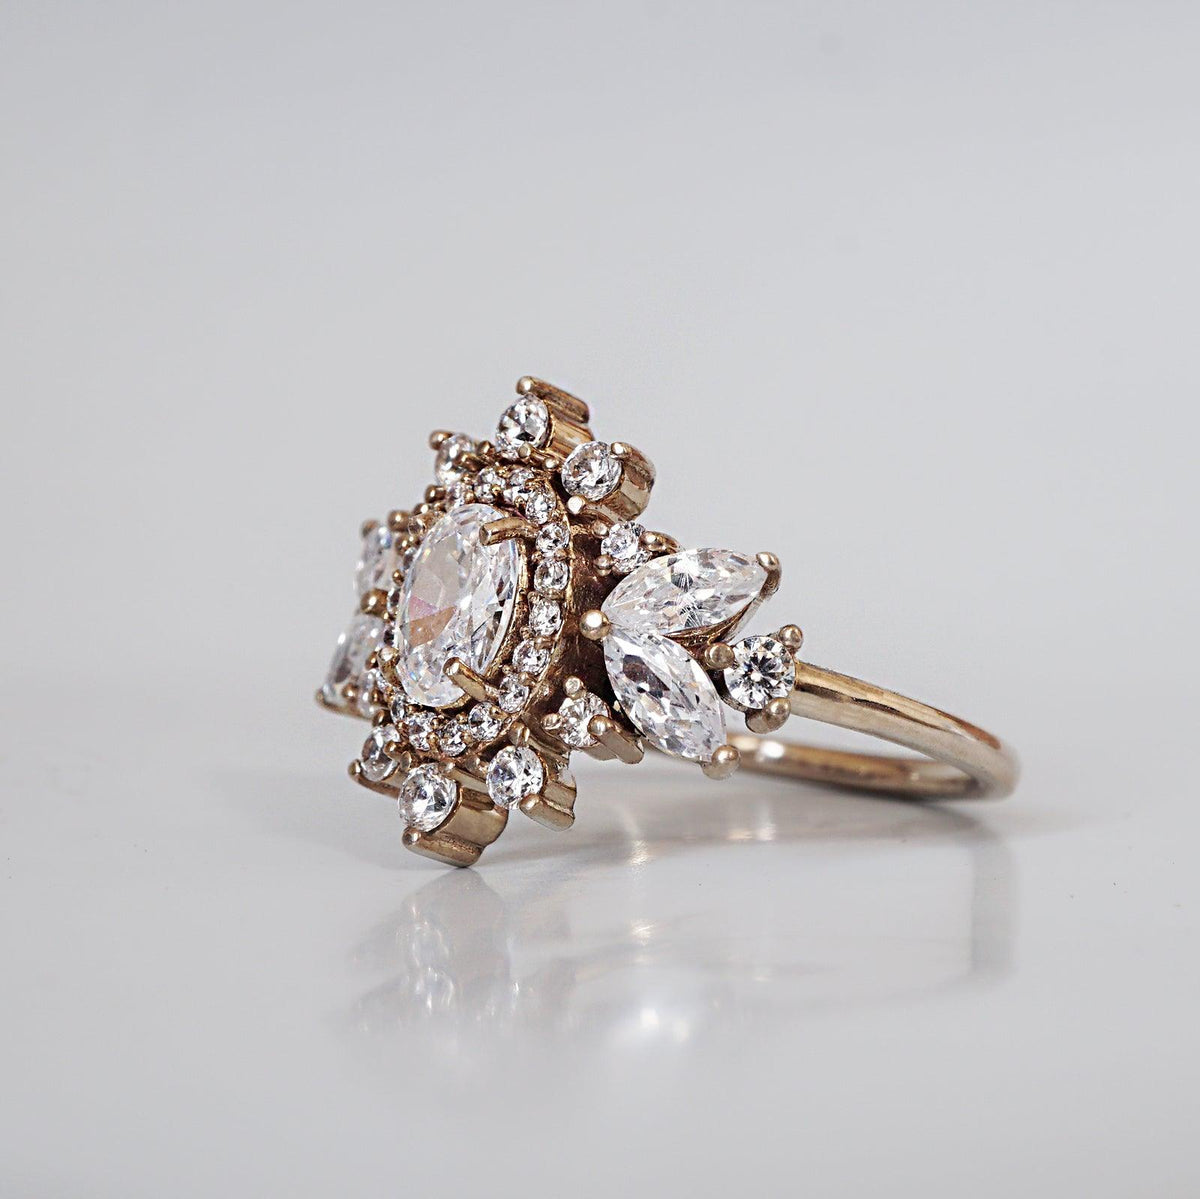 Coco Oval Diamond Ring in 14K and 18K Gold, 0.43ct (Natural Diamond or Lab Grown)